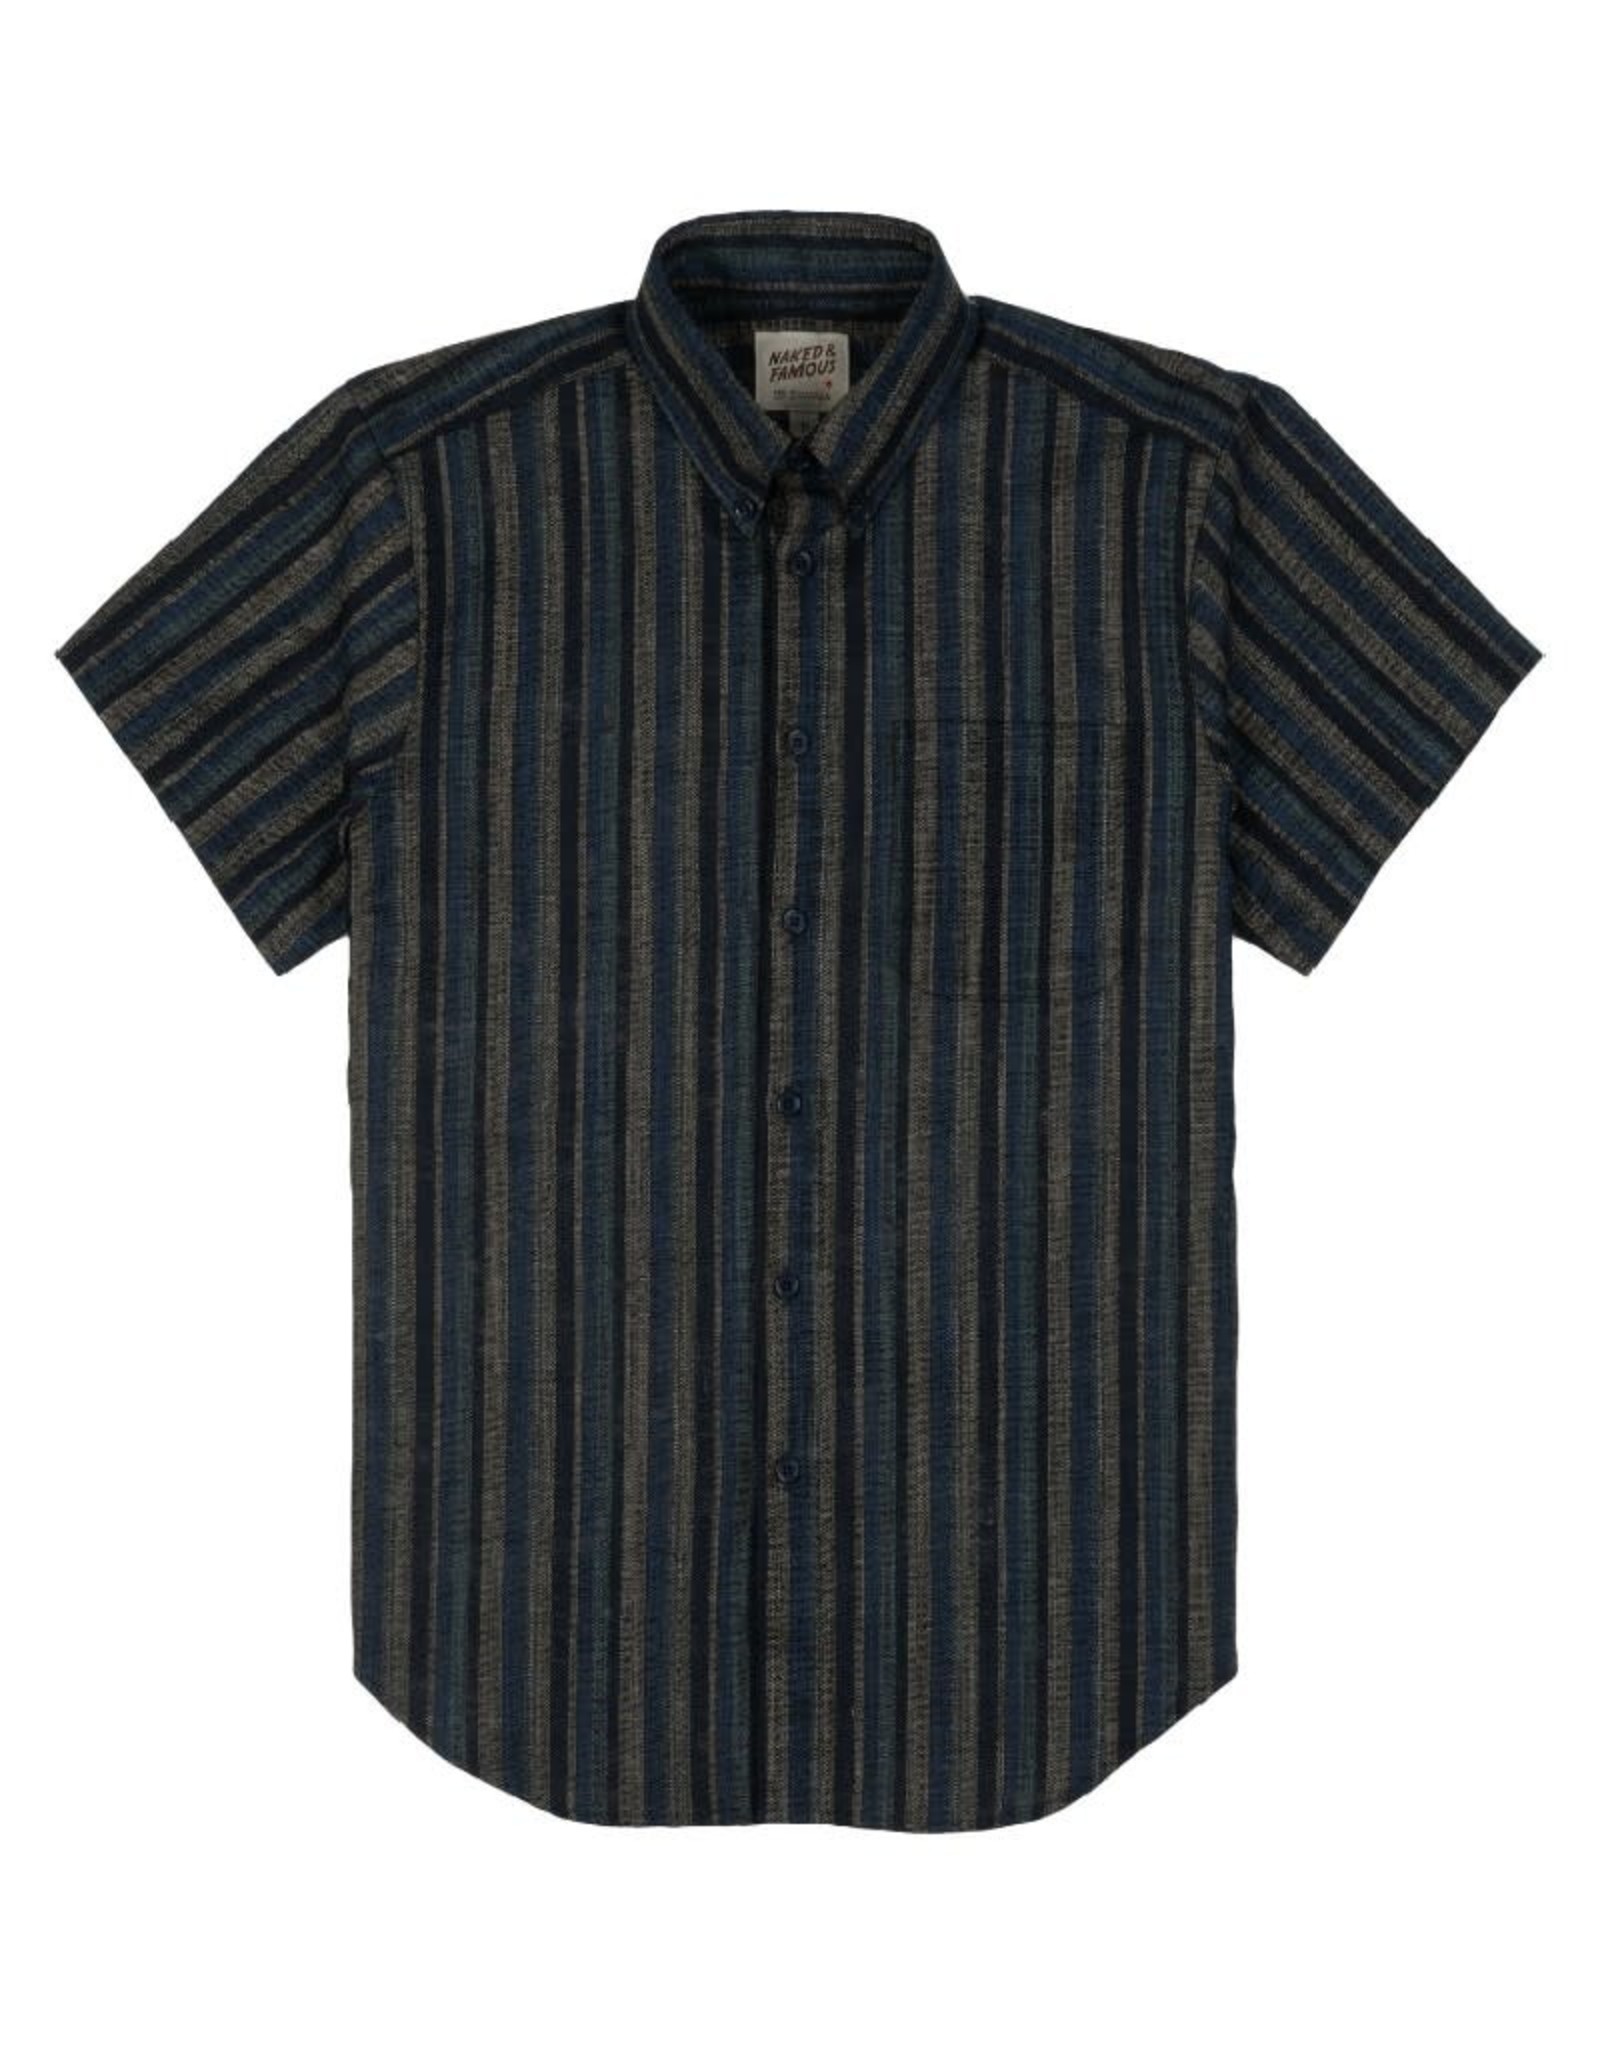 Naked and Famous Easy Shirt PE21 Naked & Famous Japan Poplin Stripes